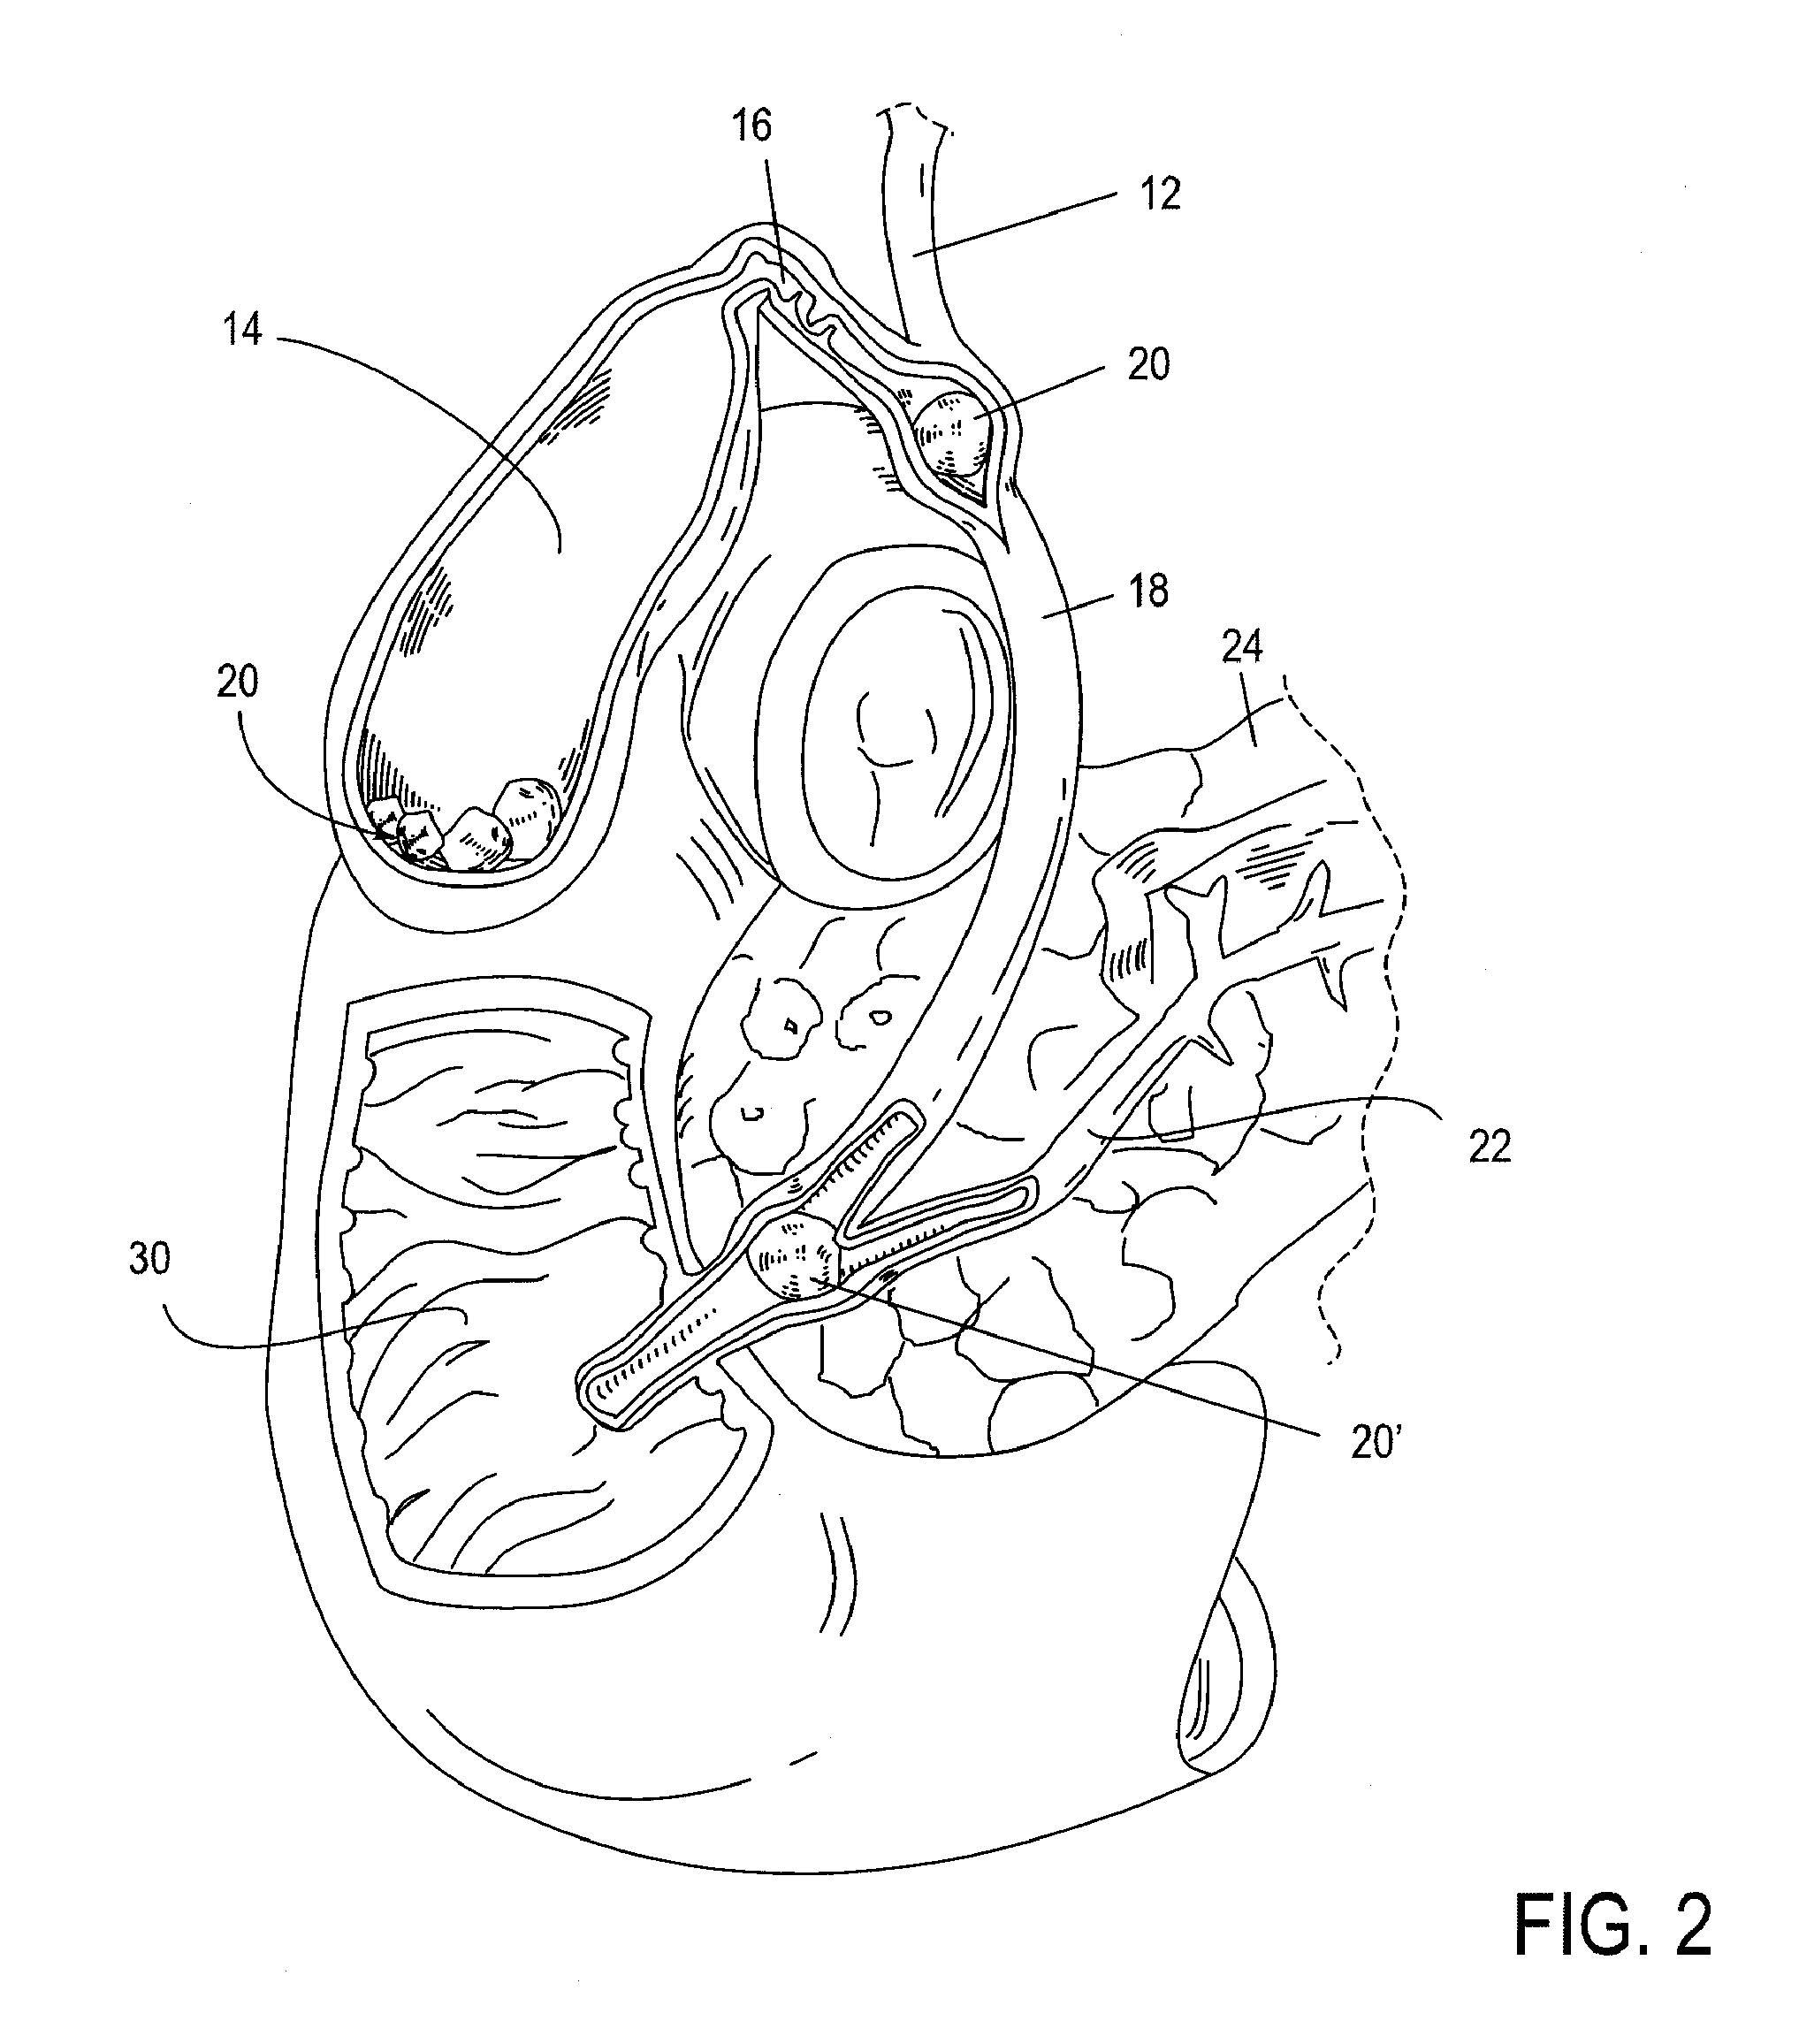 Applicator for endoscopic treatment of biliary disease